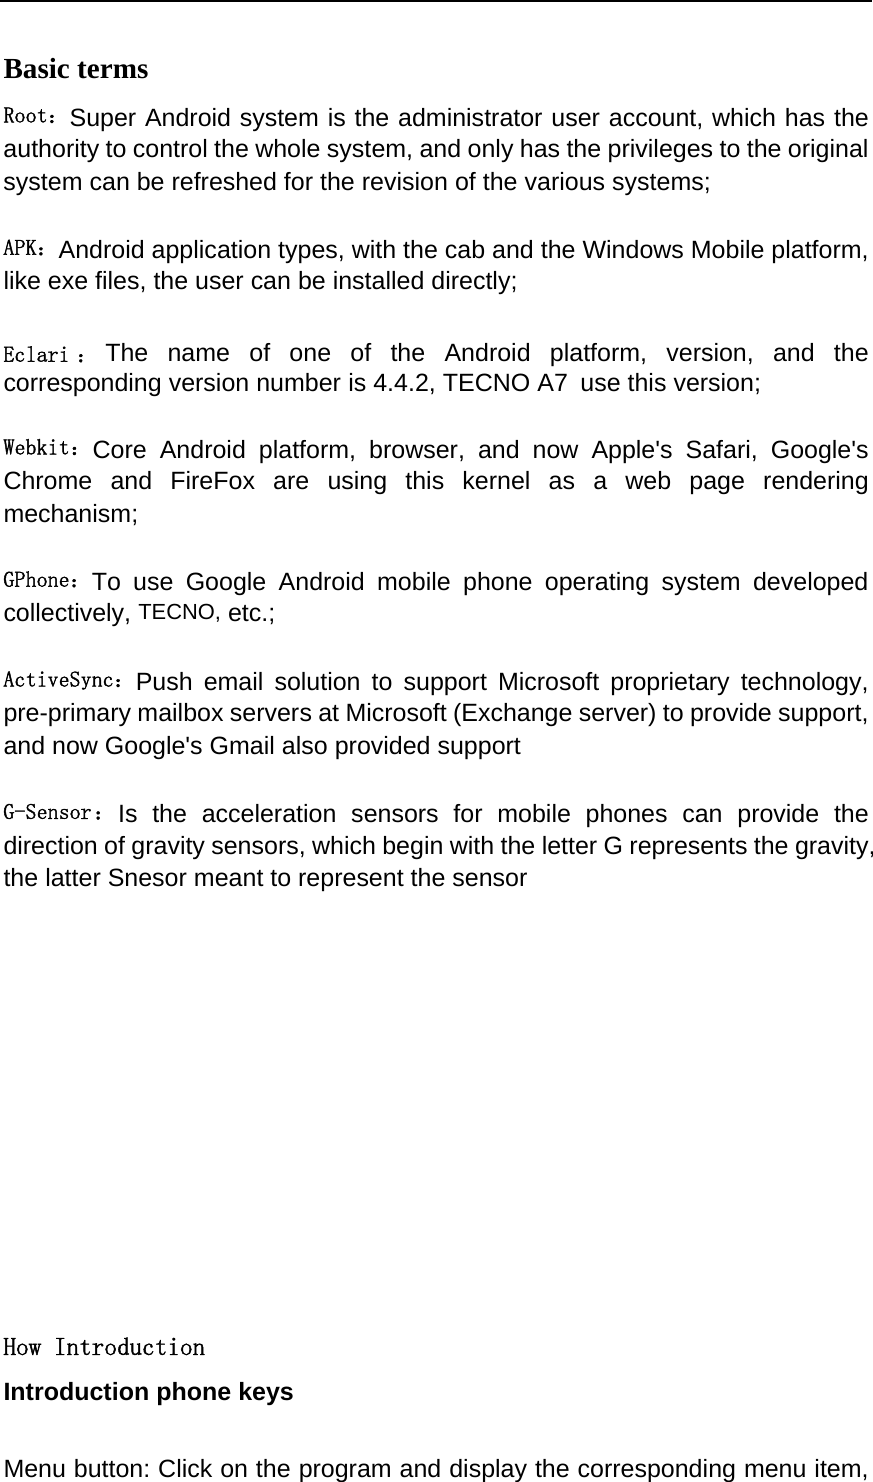  Basic terms   Root：Super Android system is the administrator user account, which has the authority to control the whole system, and only has the privileges to the original system can be refreshed for the revision of the various systems;   APK：Android application types, with the cab and the Windows Mobile platform, like exe files, the user can be installed directly;   Eclari ： The name of one of the Android platform, version, and the corresponding version number is 4.4.2, TECNO A7 use this version;  Webkit：Core Android platform, browser, and now Apple&apos;s Safari, Google&apos;s Chrome and FireFox are using this kernel as a web page rendering mechanism;   GPhone：To use Google Android mobile phone operating system developed collectively, TECNO, etc.;   ActiveSync：Push email solution to support Microsoft proprietary technology, pre-primary mailbox servers at Microsoft (Exchange server) to provide support, and now Google&apos;s Gmail also provided support   G-Sensor： Is the acceleration sensors for mobile phones can provide the direction of gravity sensors, which begin with the letter G represents the gravity, the latter Snesor meant to represent the sensor             How Introduction Introduction phone keys  Menu button: Click on the program and display the corresponding menu item, 